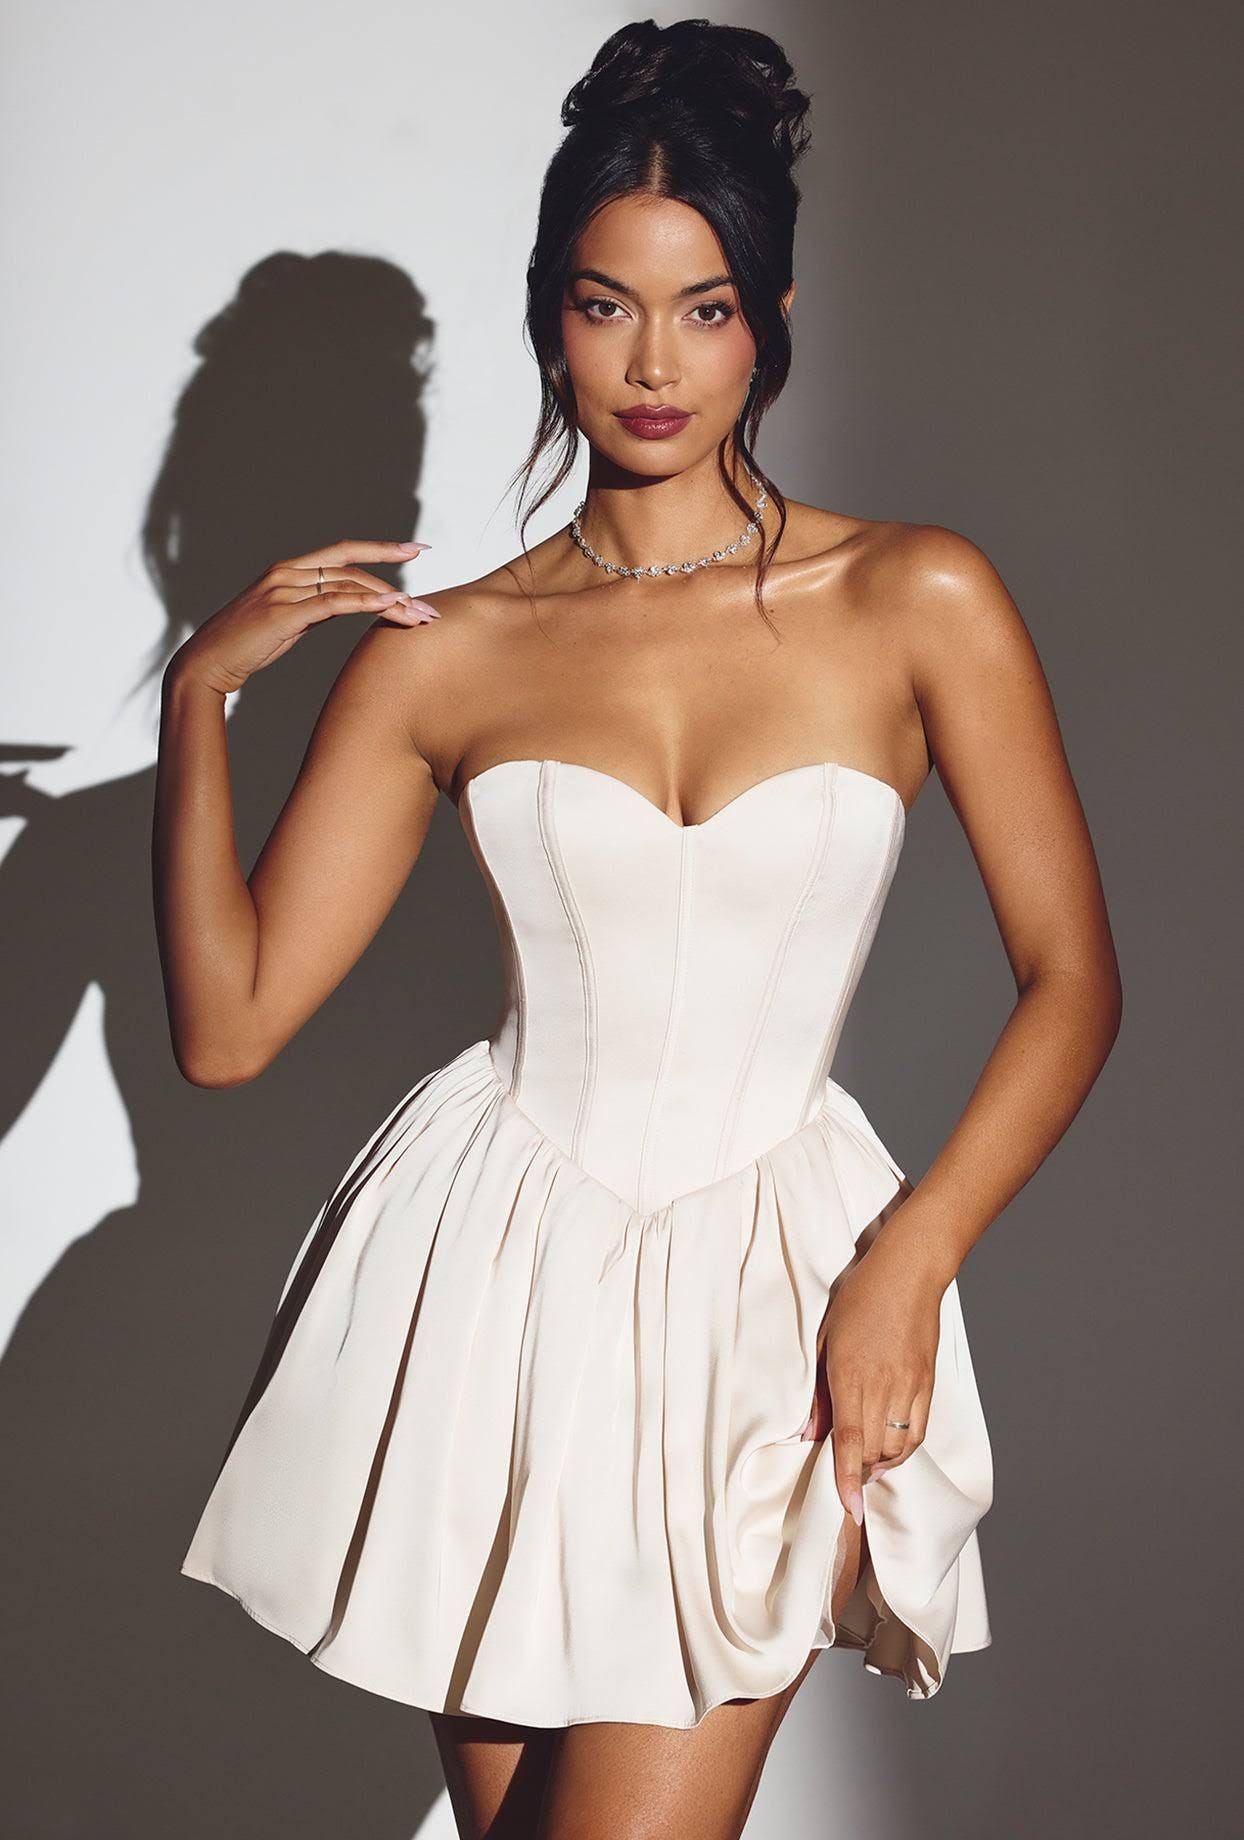 Strapless White Mini Dress with Lace-up Corset Body | Image